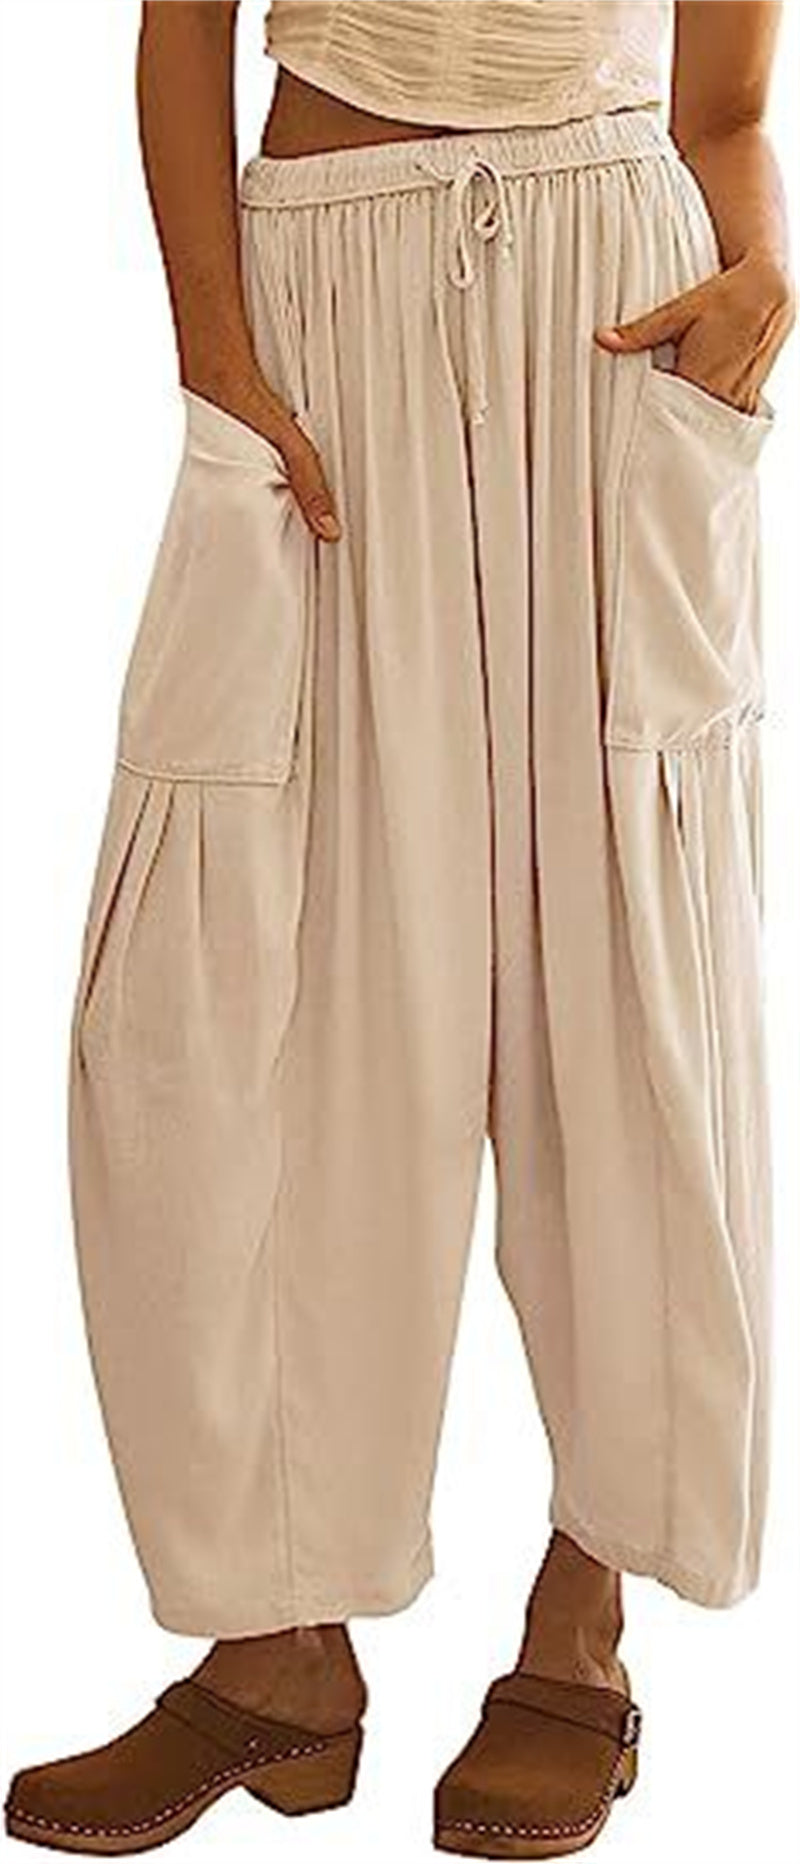 Summer Fashion Women's Solid Color Wide Leg Pants: Loose Elastic High Waist Pleated Trousers